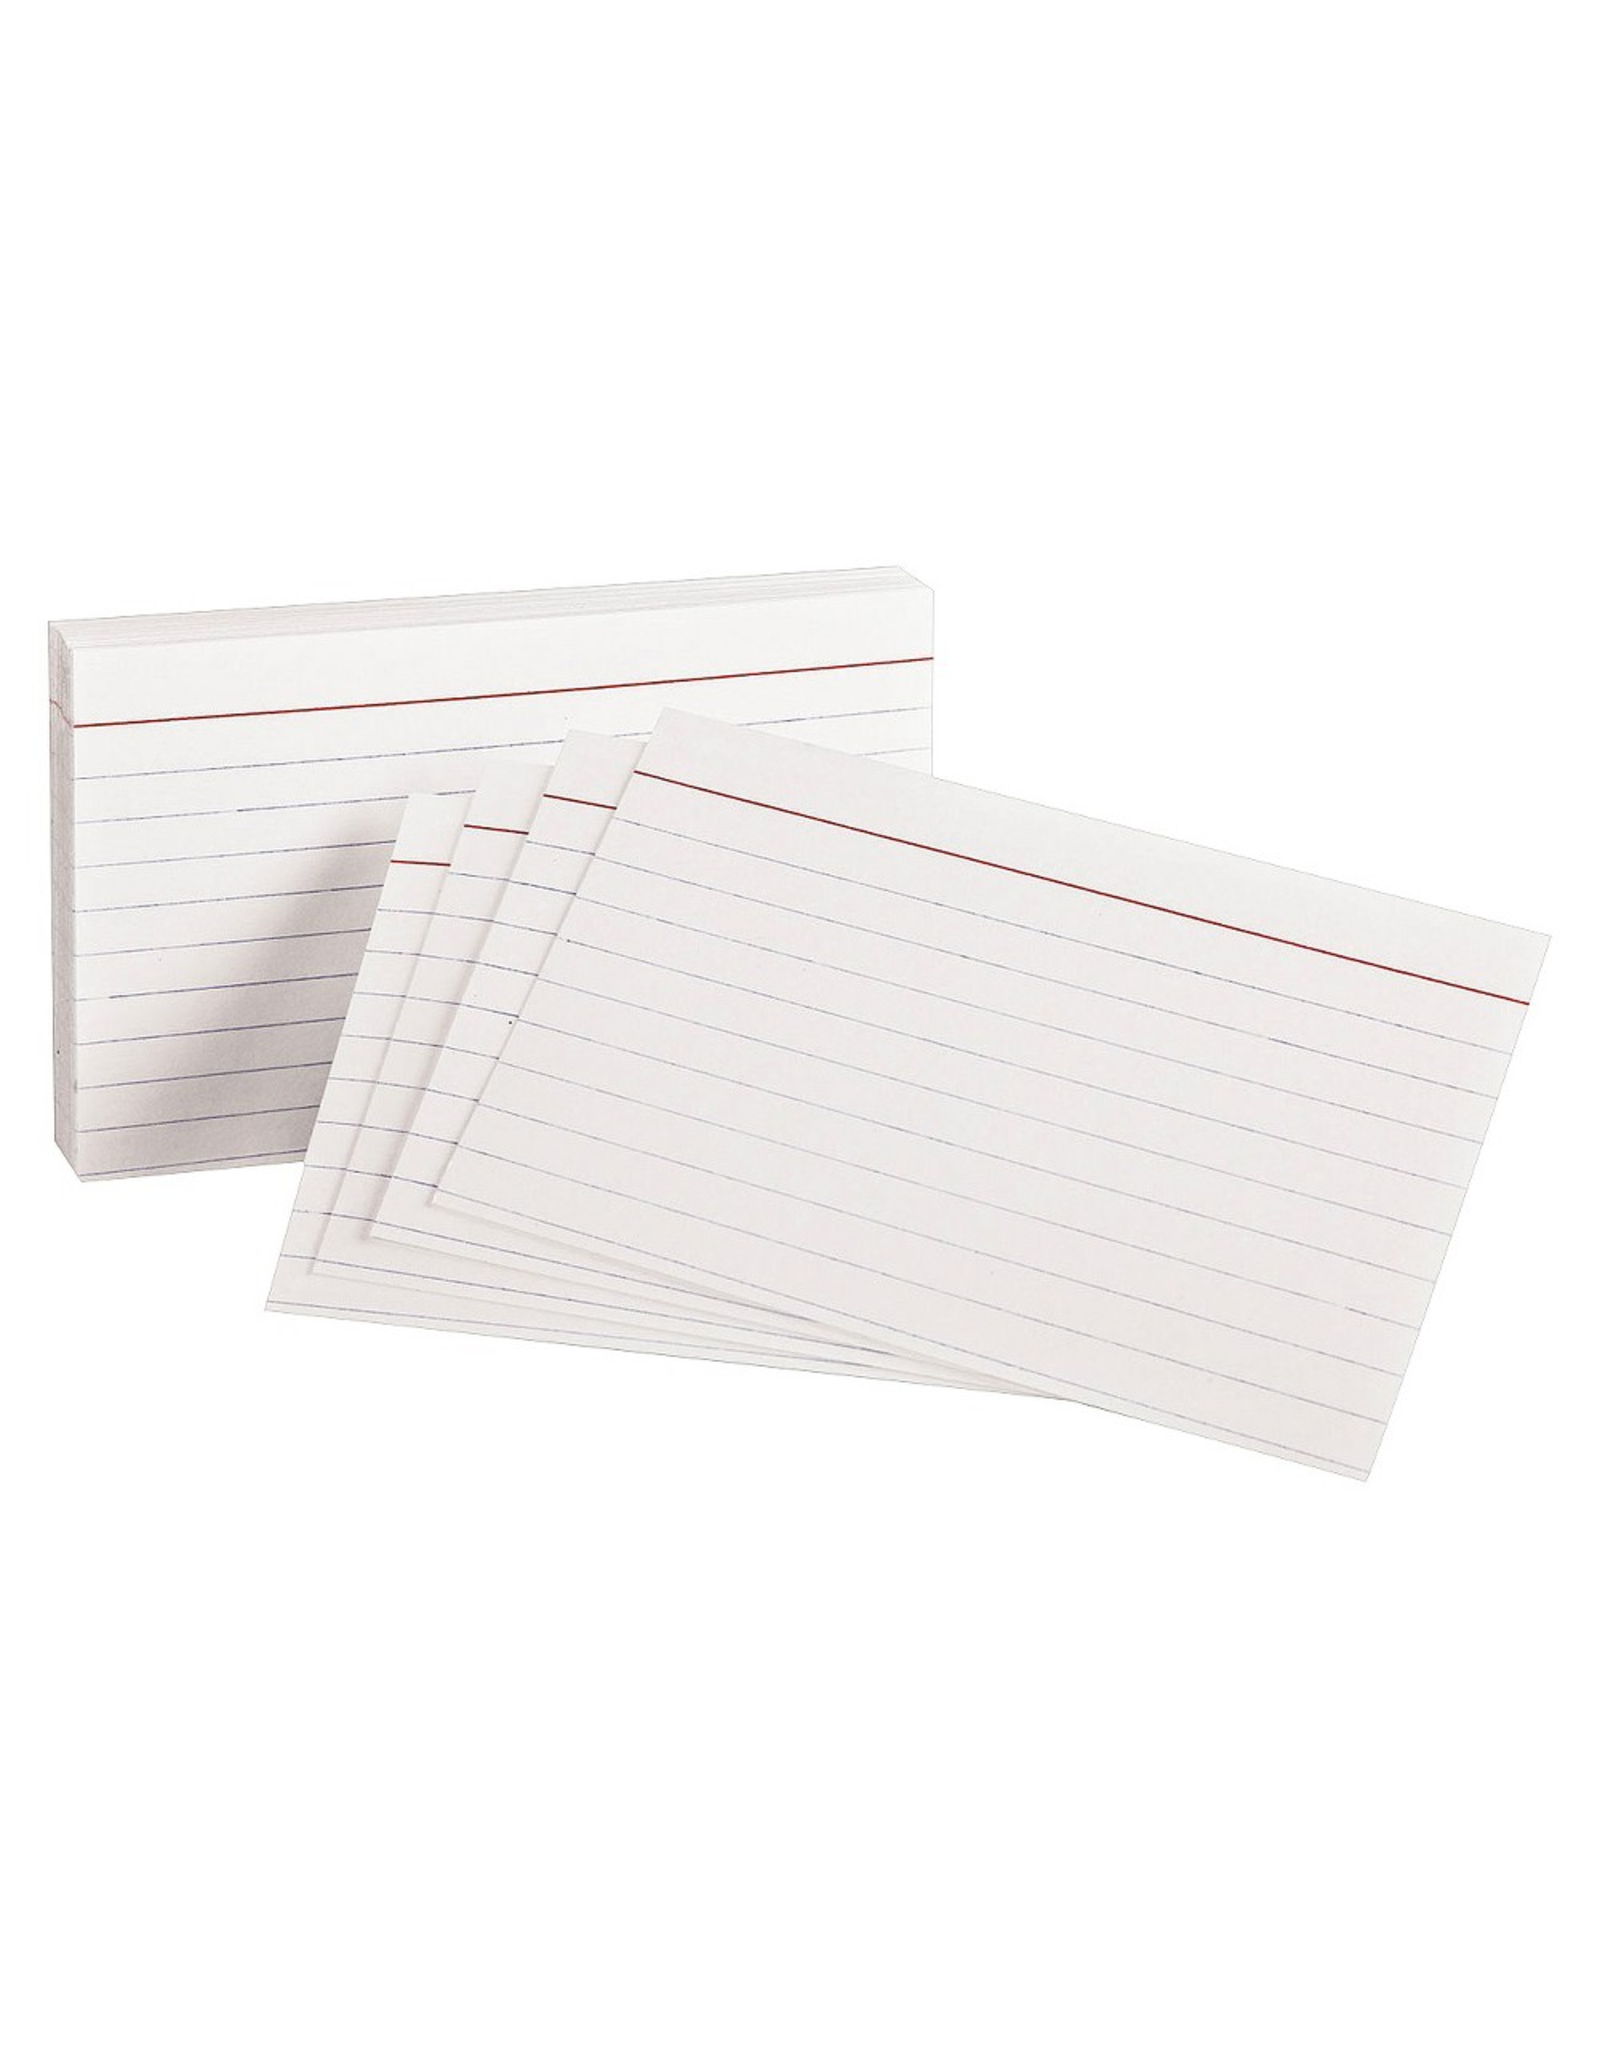 MEAD INDEX CARDS - 3"x5" - RULED WHITE - 100 PACK